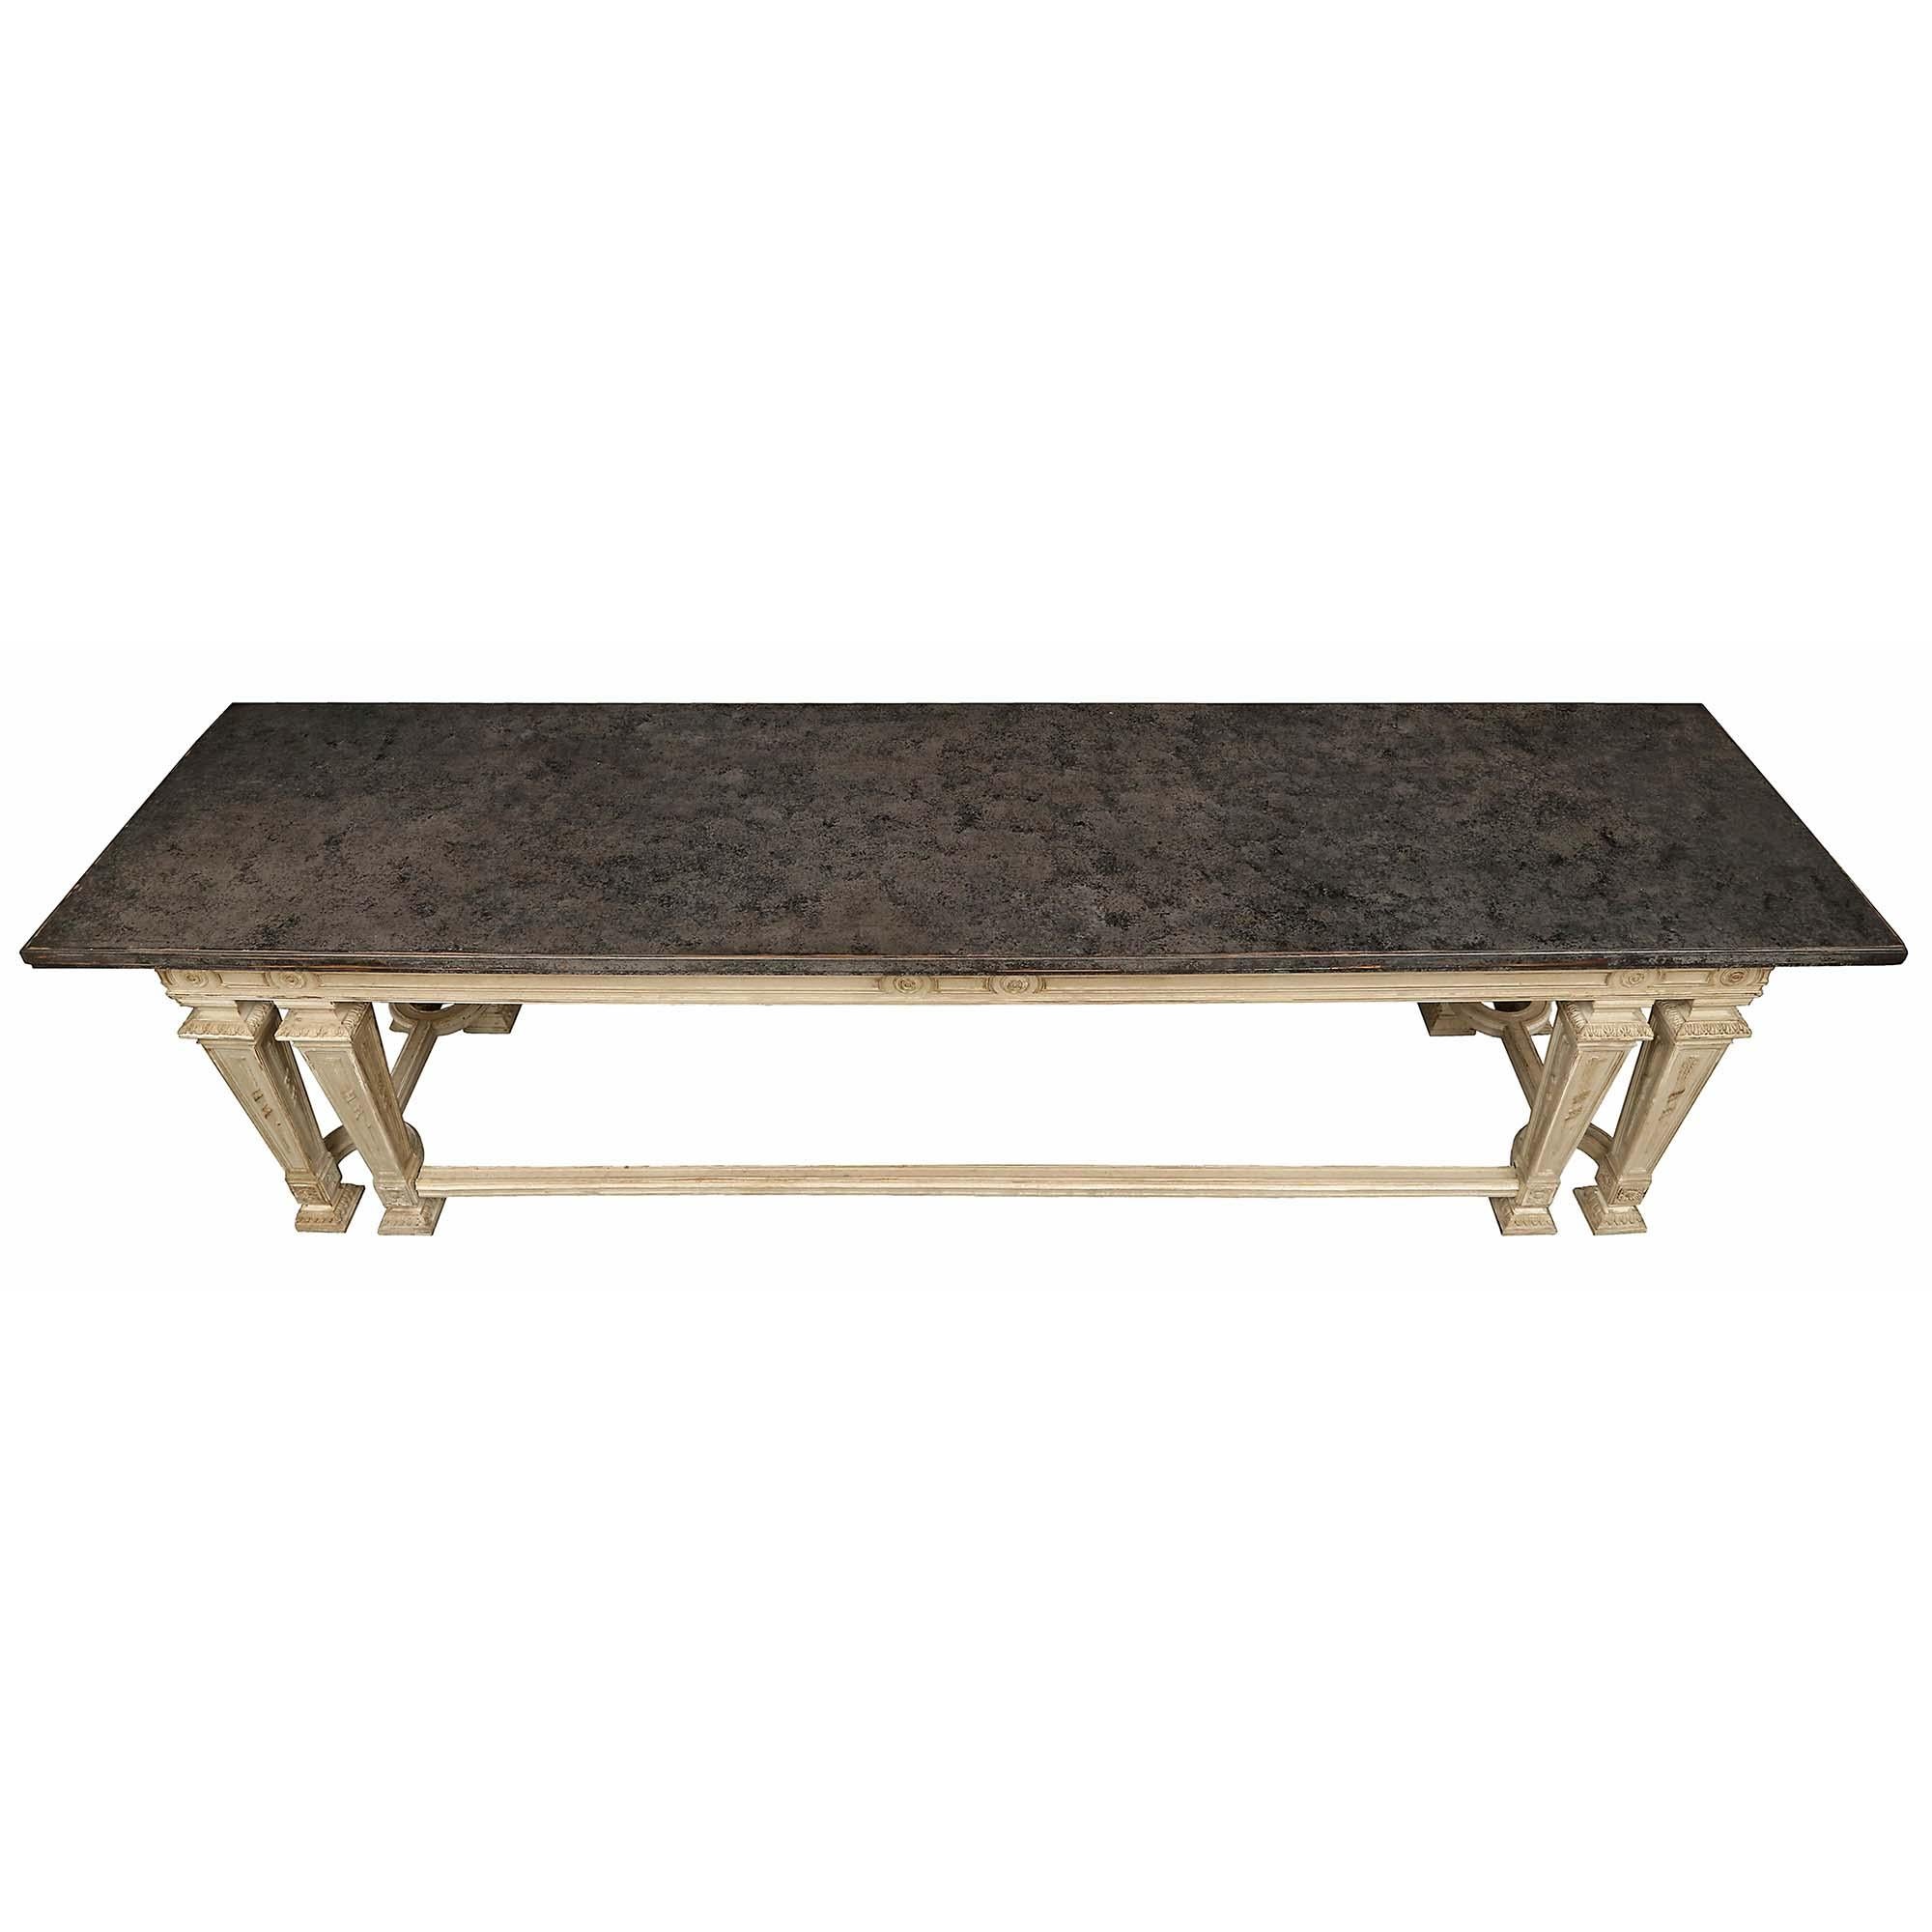 A very attractive French turn of the century Louis XIV style the patinated center or library table. The table is raised by eight handsome square tapered legs with richly carved feet, block cabochons, and arrows on a recessed panel, connected by a